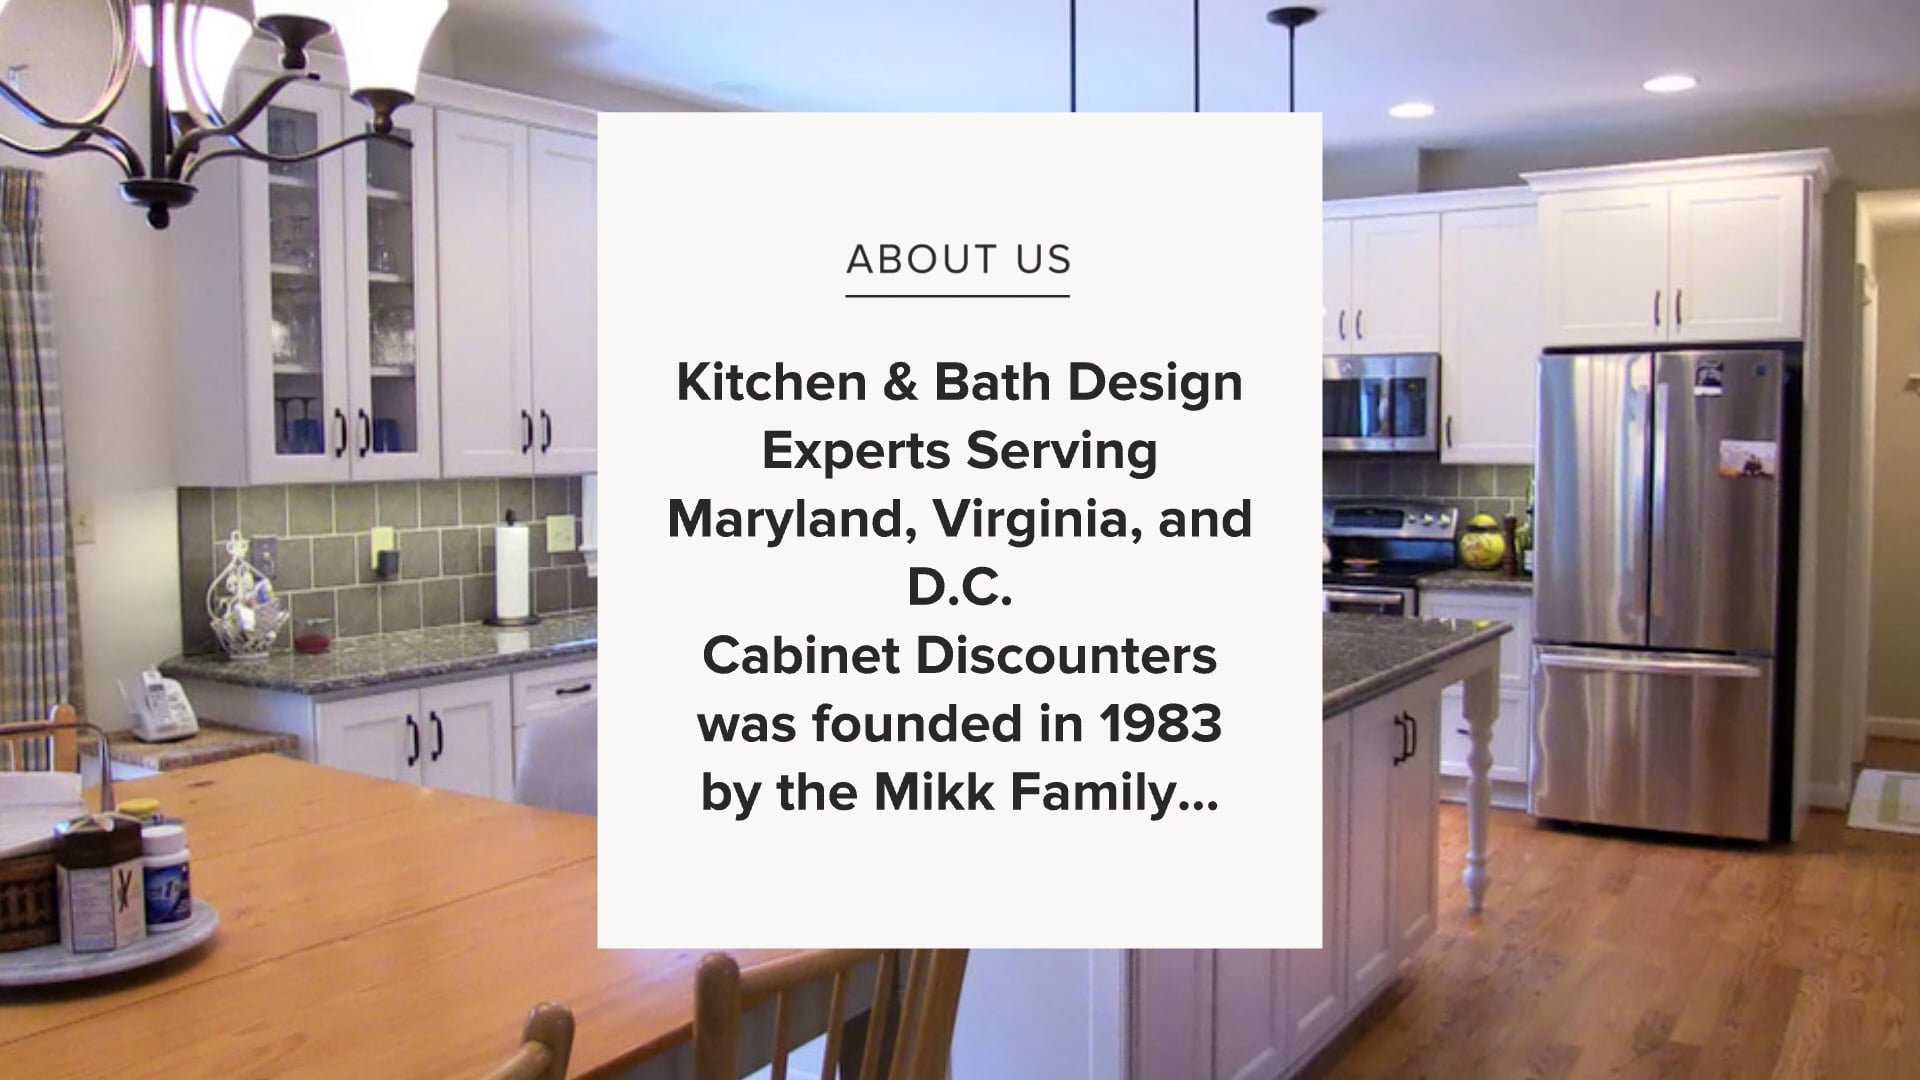 Grand Design Kitchens. Kitchen and Bath design and remodeling.